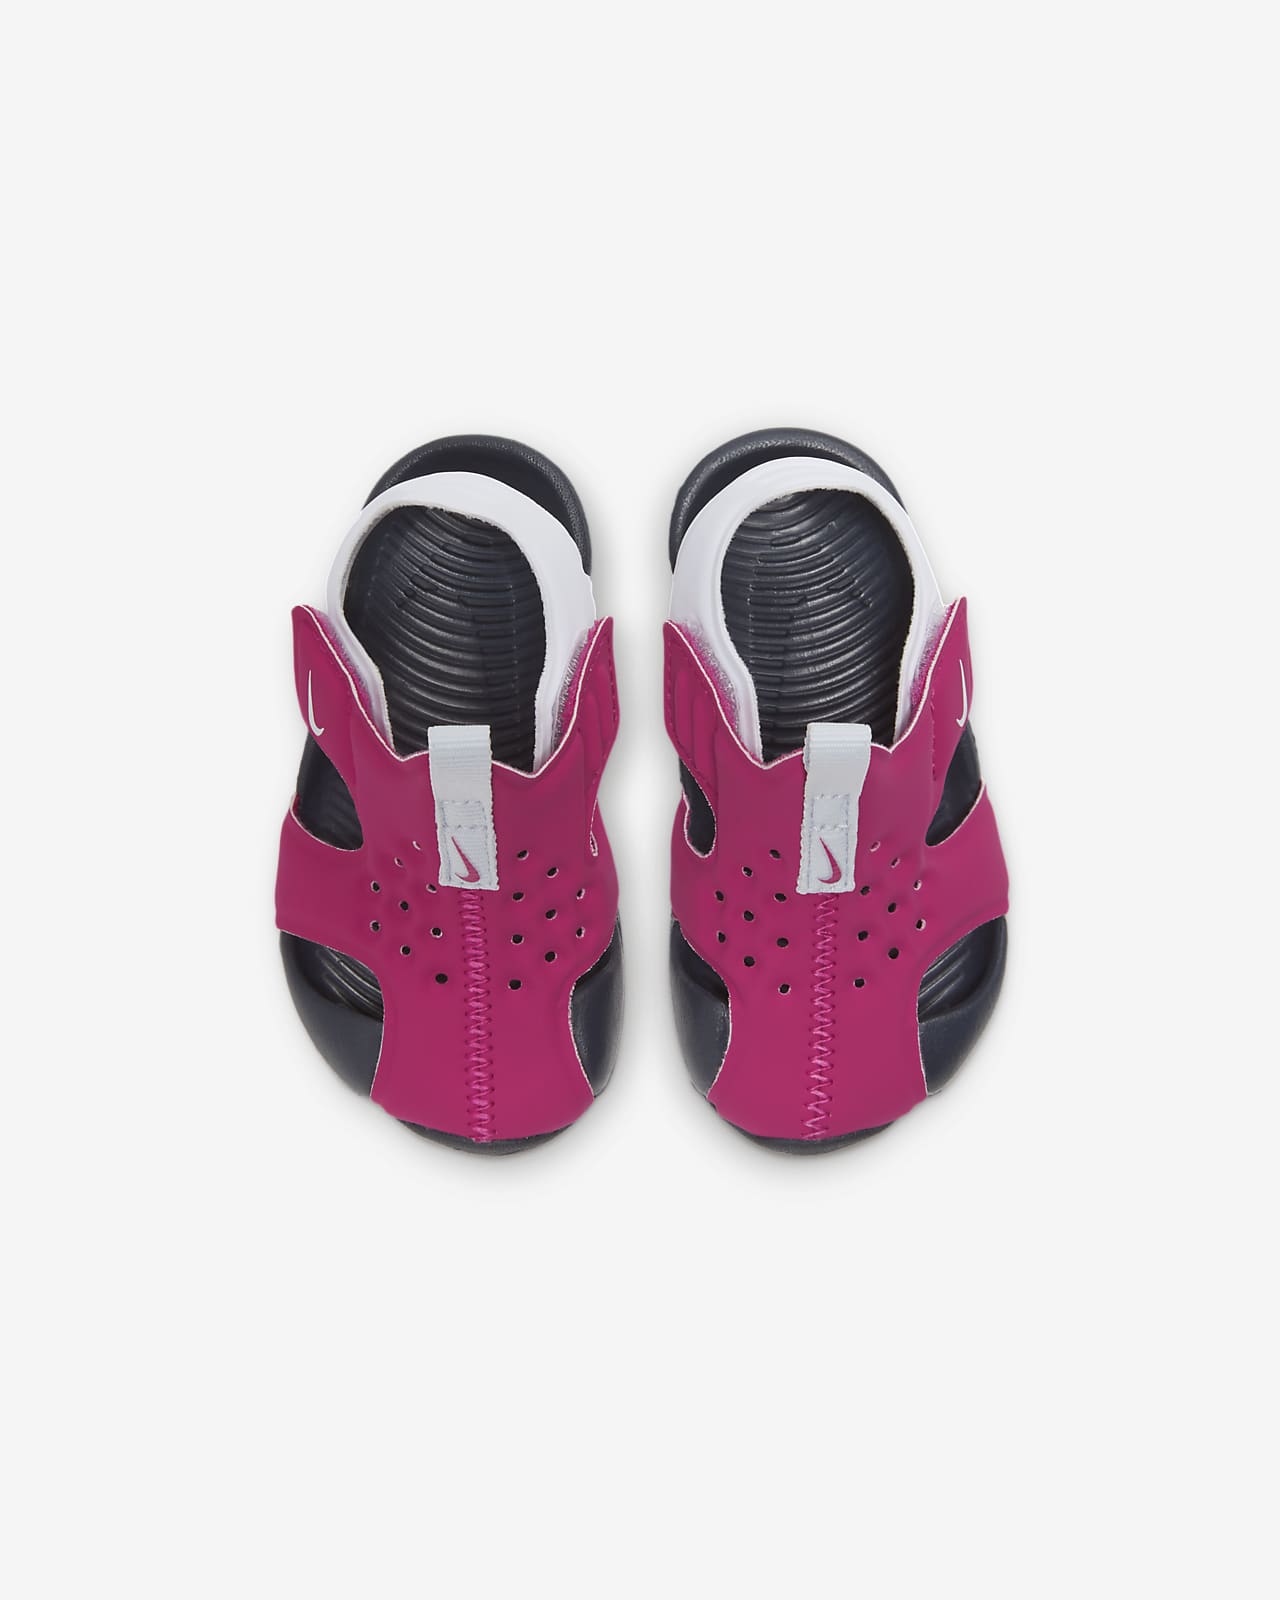 nike sunray protect baby sandals